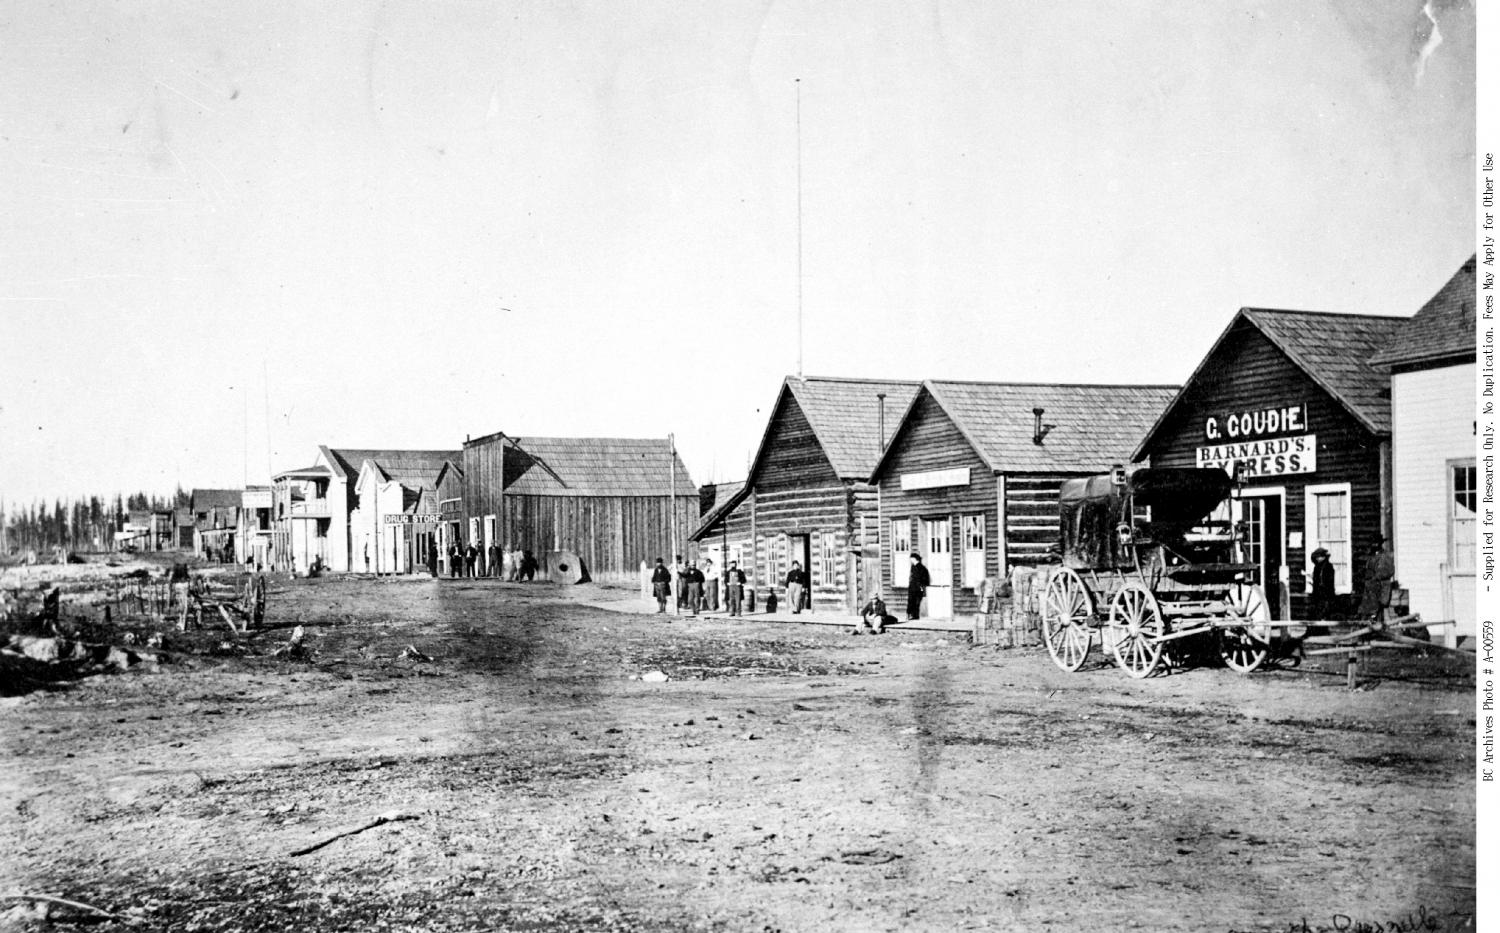 Quesnel ca. 1865: businesses, some people buggy without horse.